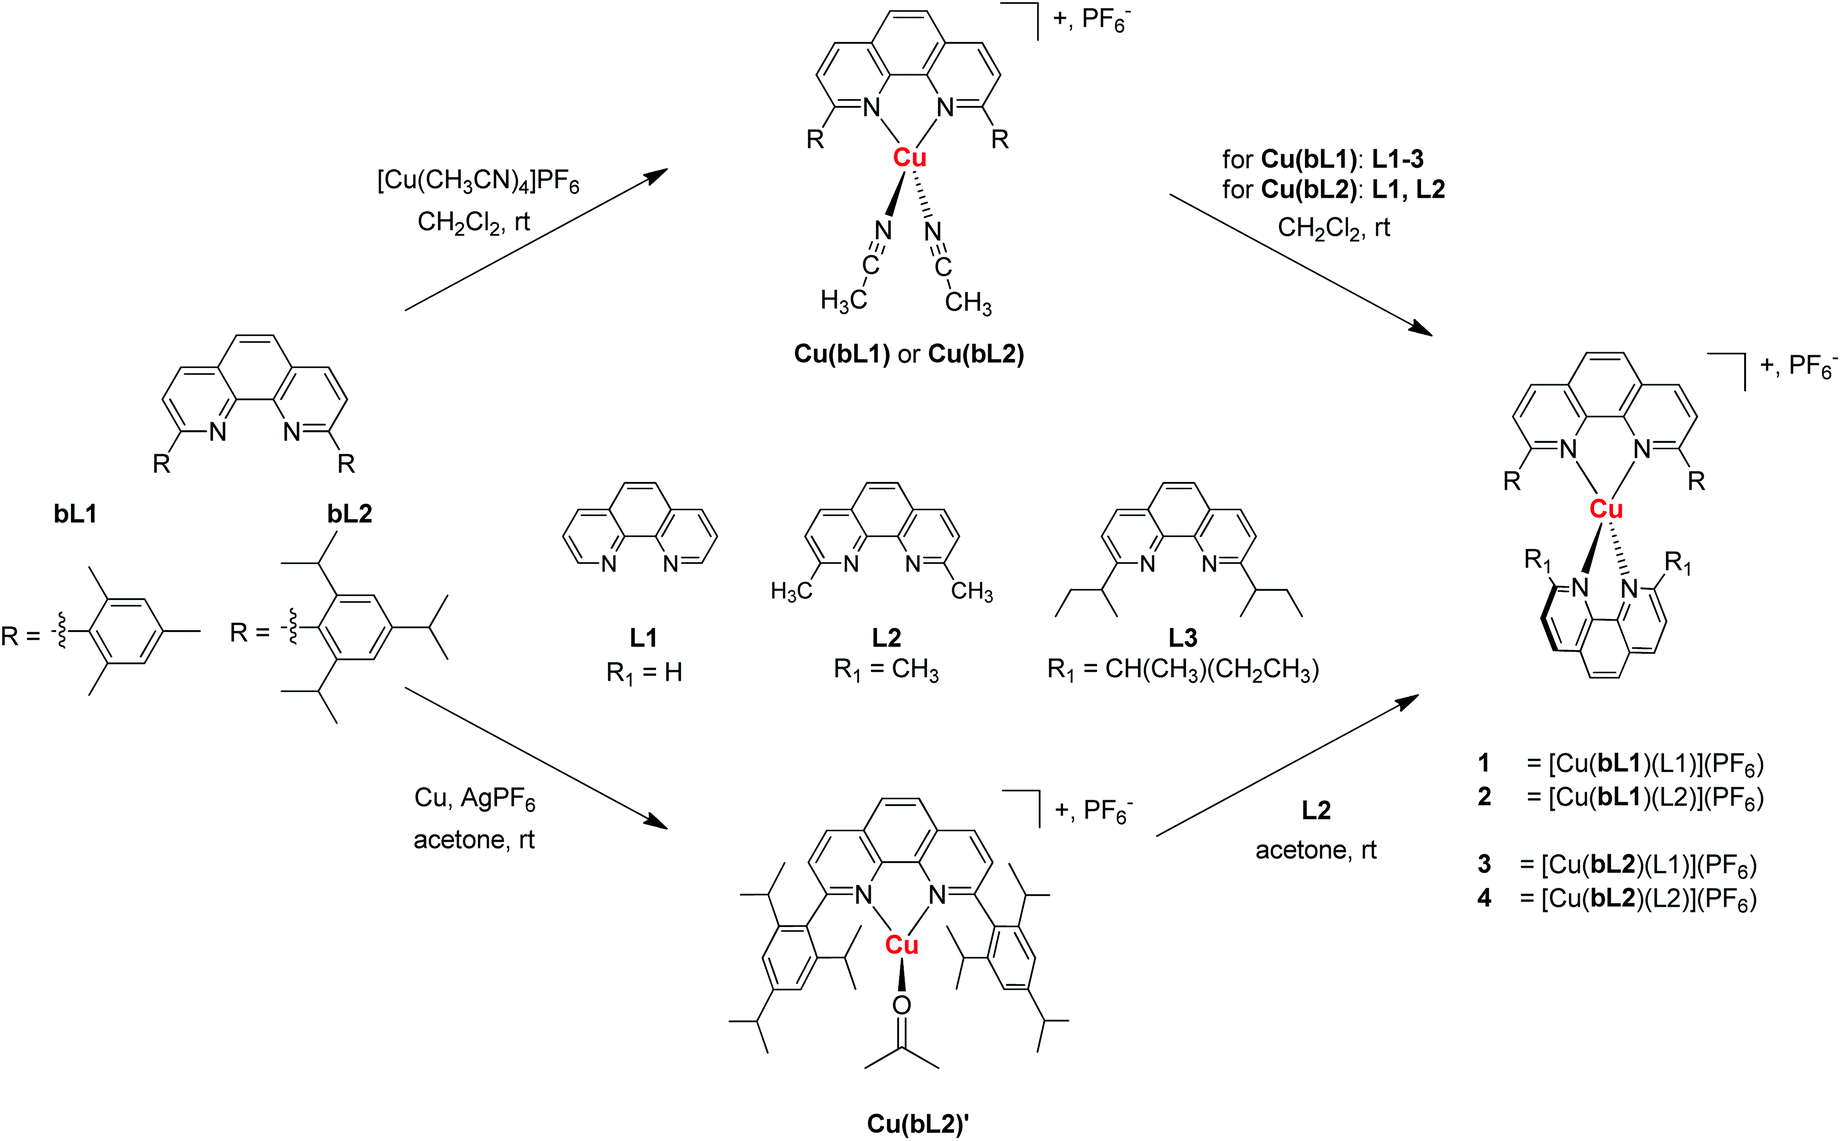 Synthesis of CuHETPHEN complexes. The top synthesis route follows the typical HETPHEN approach developed by Schmittel and co-workers using the [Cu(CH3CN)4](PF6) reagent. The bottom synthesis route follows the approach developed by Gandhi et al. via oxidation of Cu(0) in non-coordinating solvents.